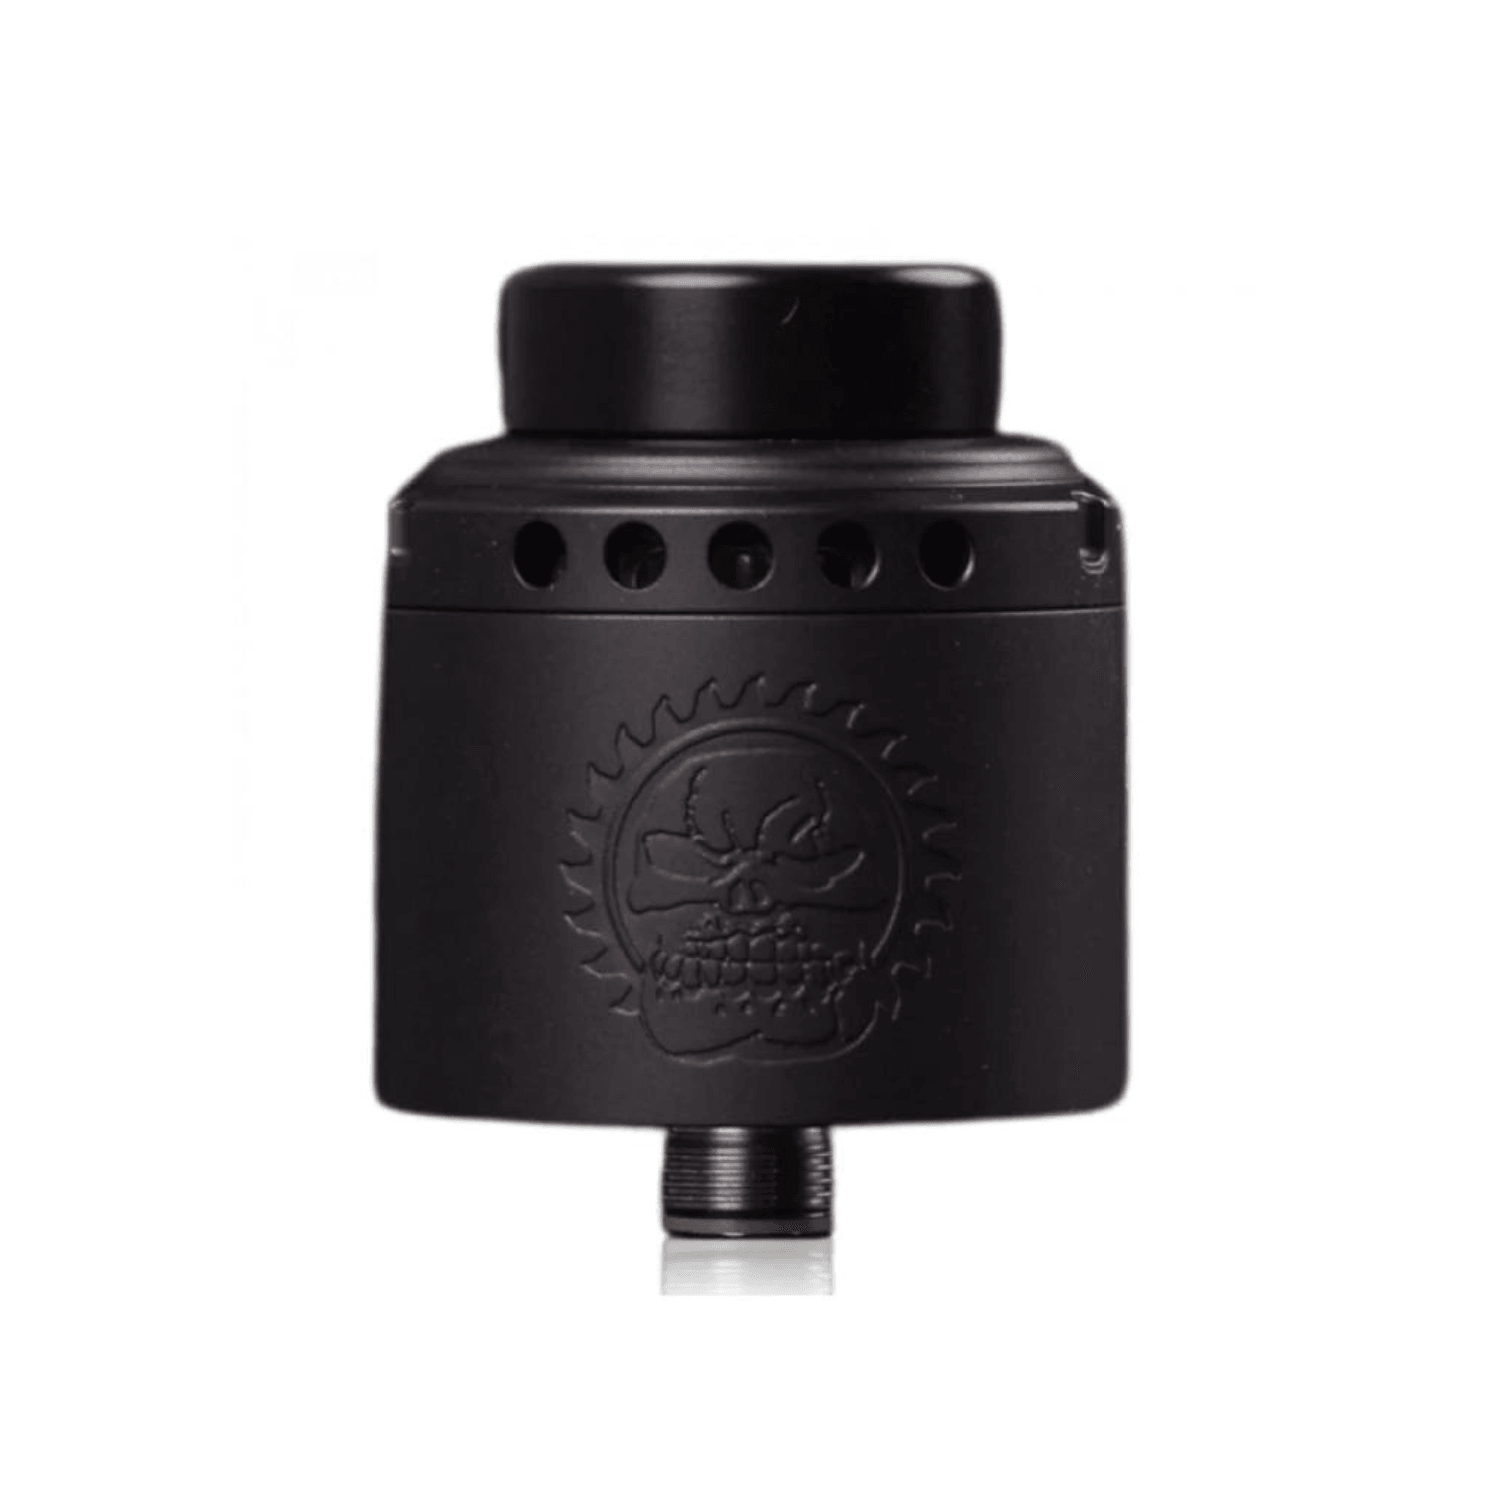 Ripsaw RDA Suicide Mods black